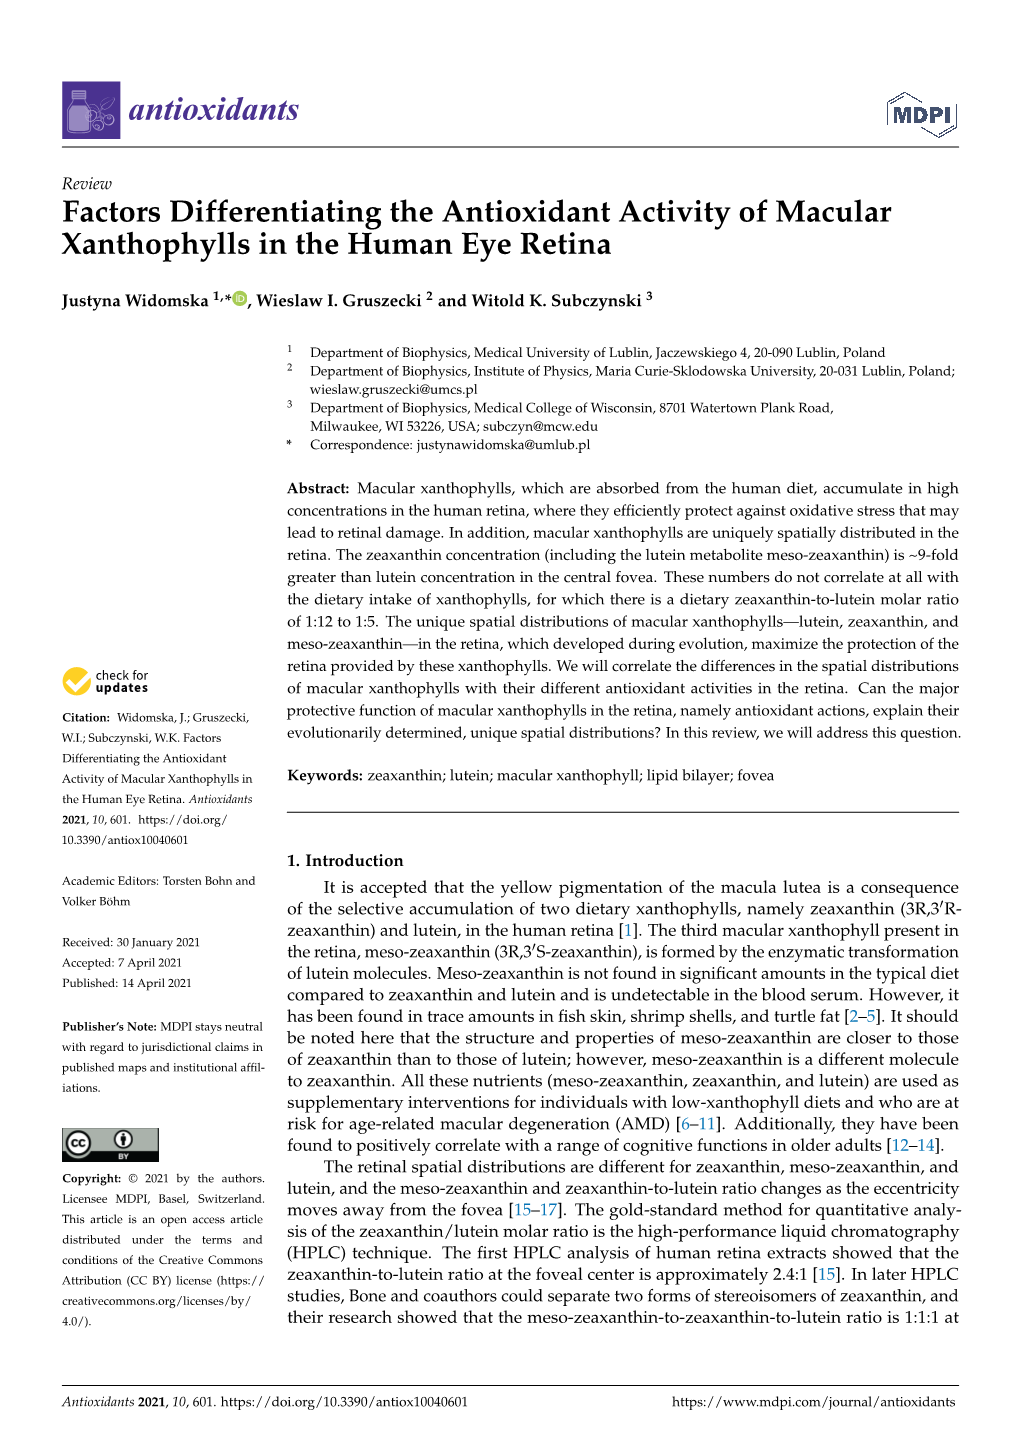 Factors Differentiating the Antioxidant Activity of Macular Xanthophylls in the Human Eye Retina